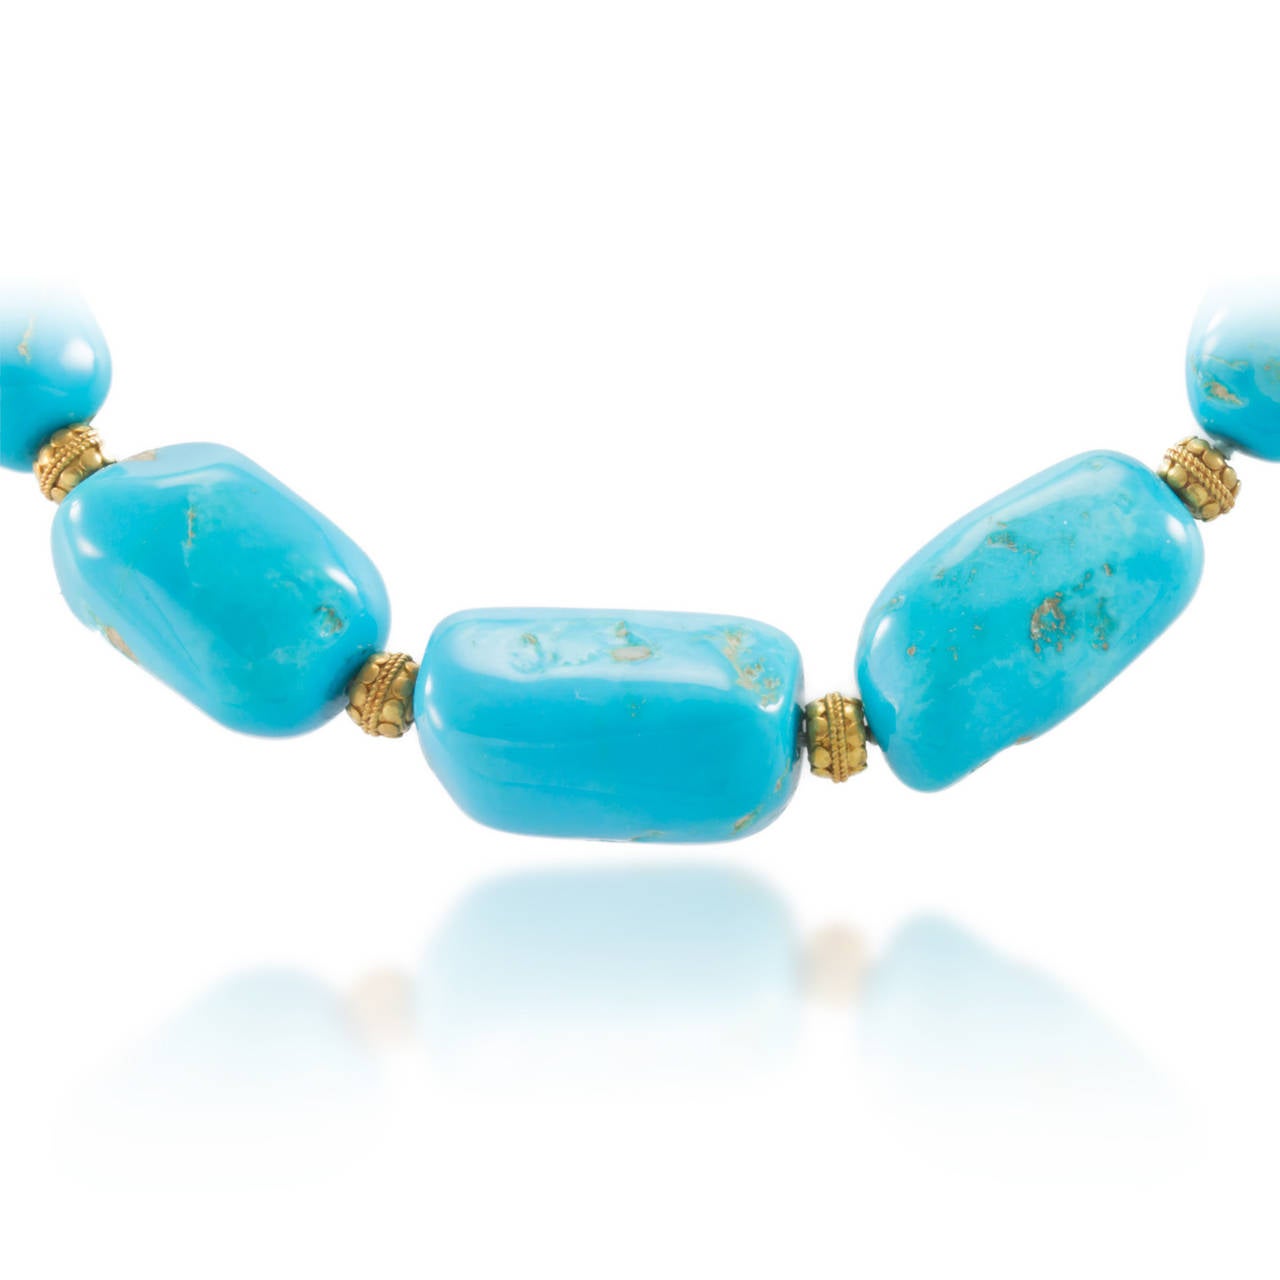 Lady's sing strand Turquoise bead necklace with a 14K yellow gold (stamped) hook clasp and twelve (12) yellow gold beads. Construction is cast and hand strung with good workmanship. 

Tumbled Beads:
Size: 17.64 x 13.23-26.00 x 16.05
Color: